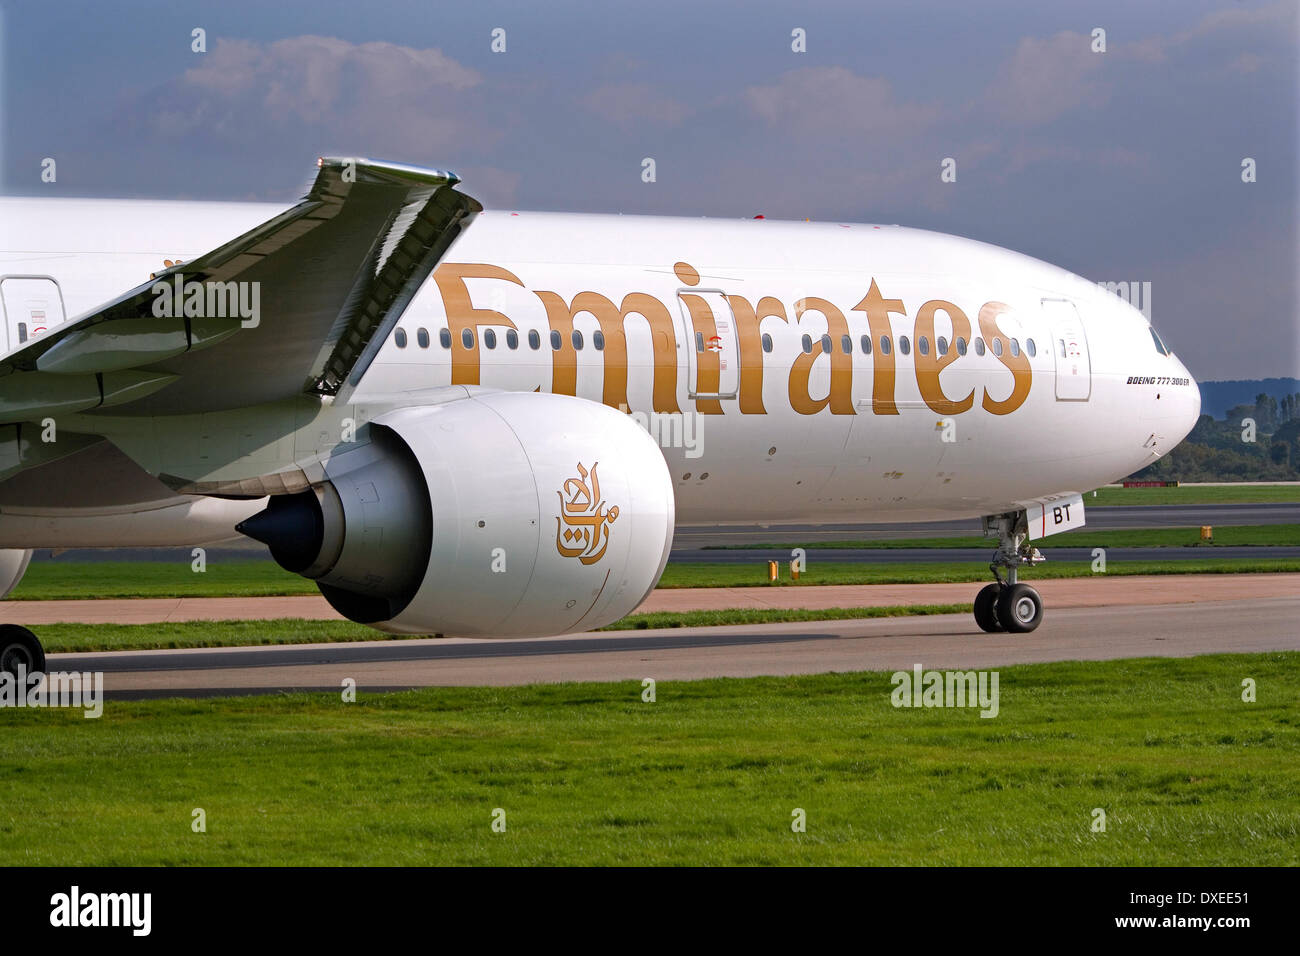 Emerates boeing777-300 taxi-ing at MAN airport england Stock Photo